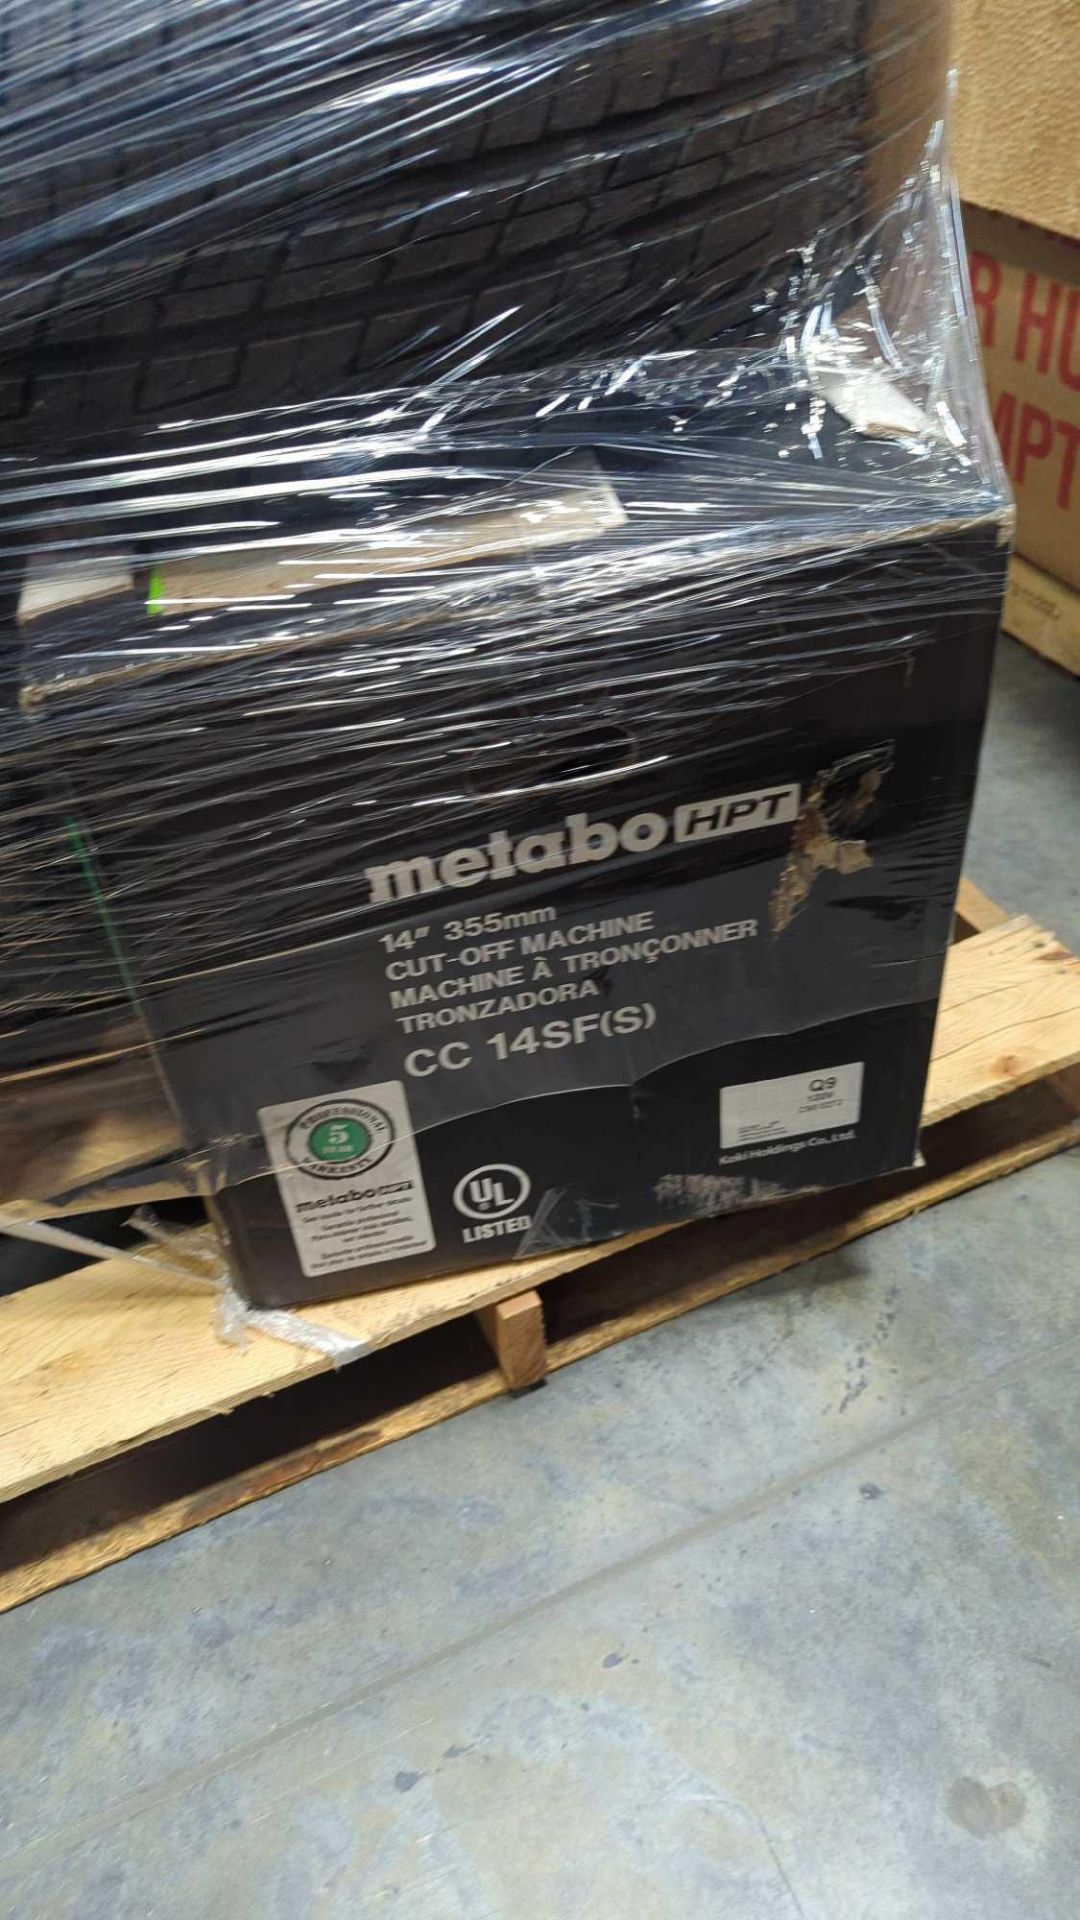 metabo cutoff machine and tires - Image 3 of 7